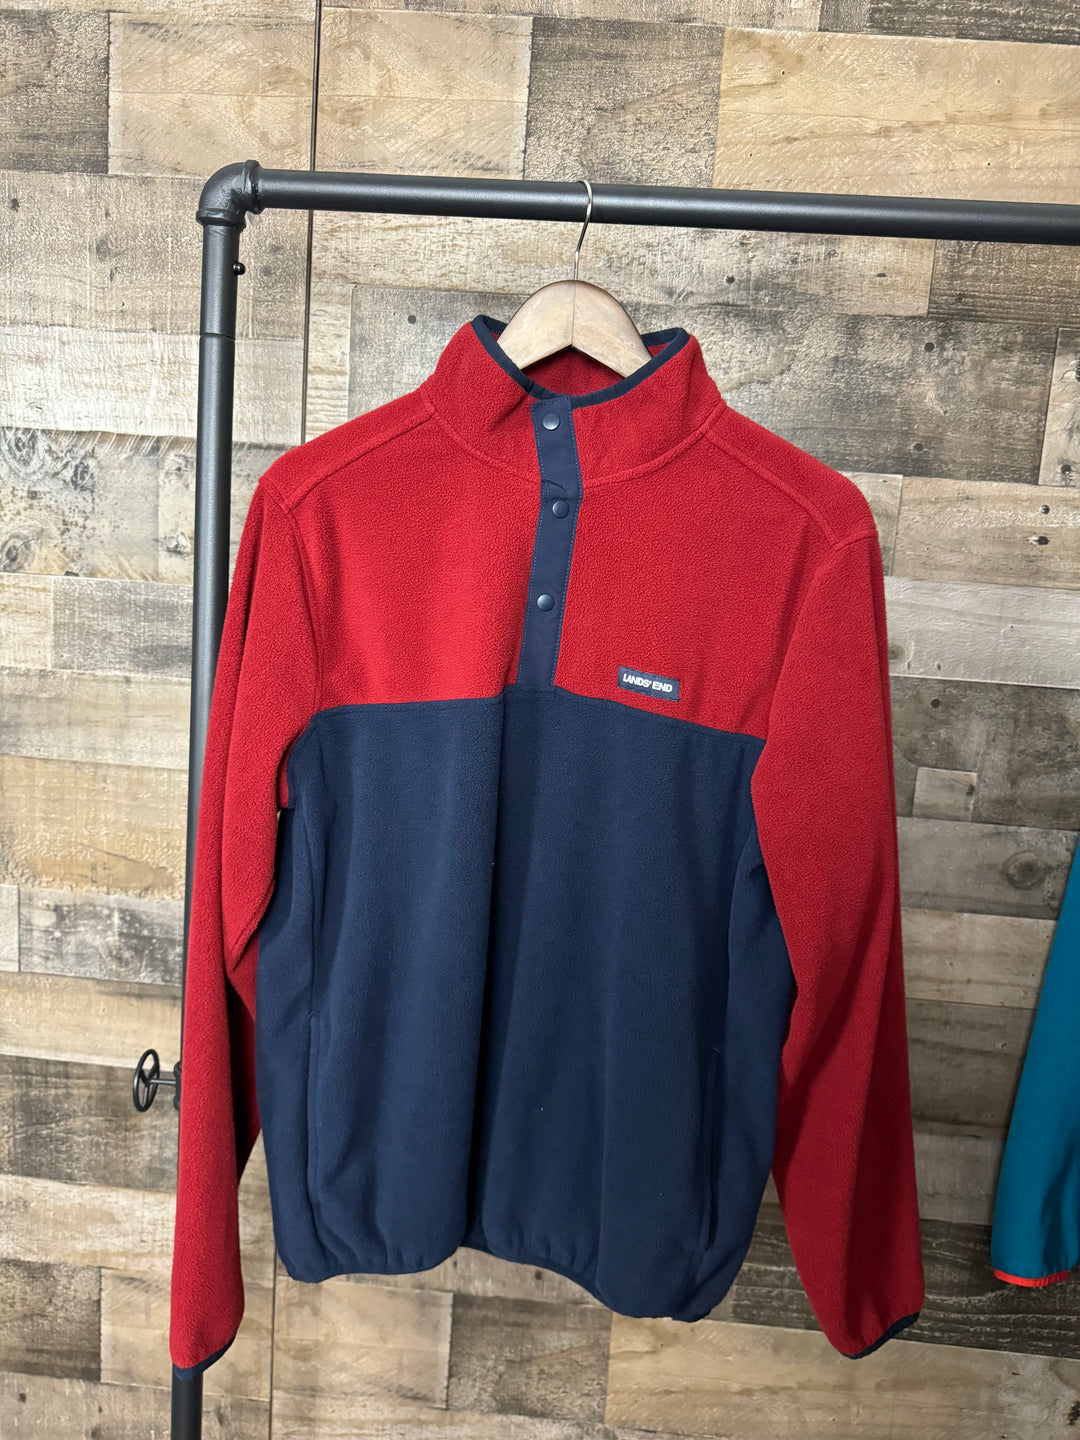 Fuzzy red/navy pull over